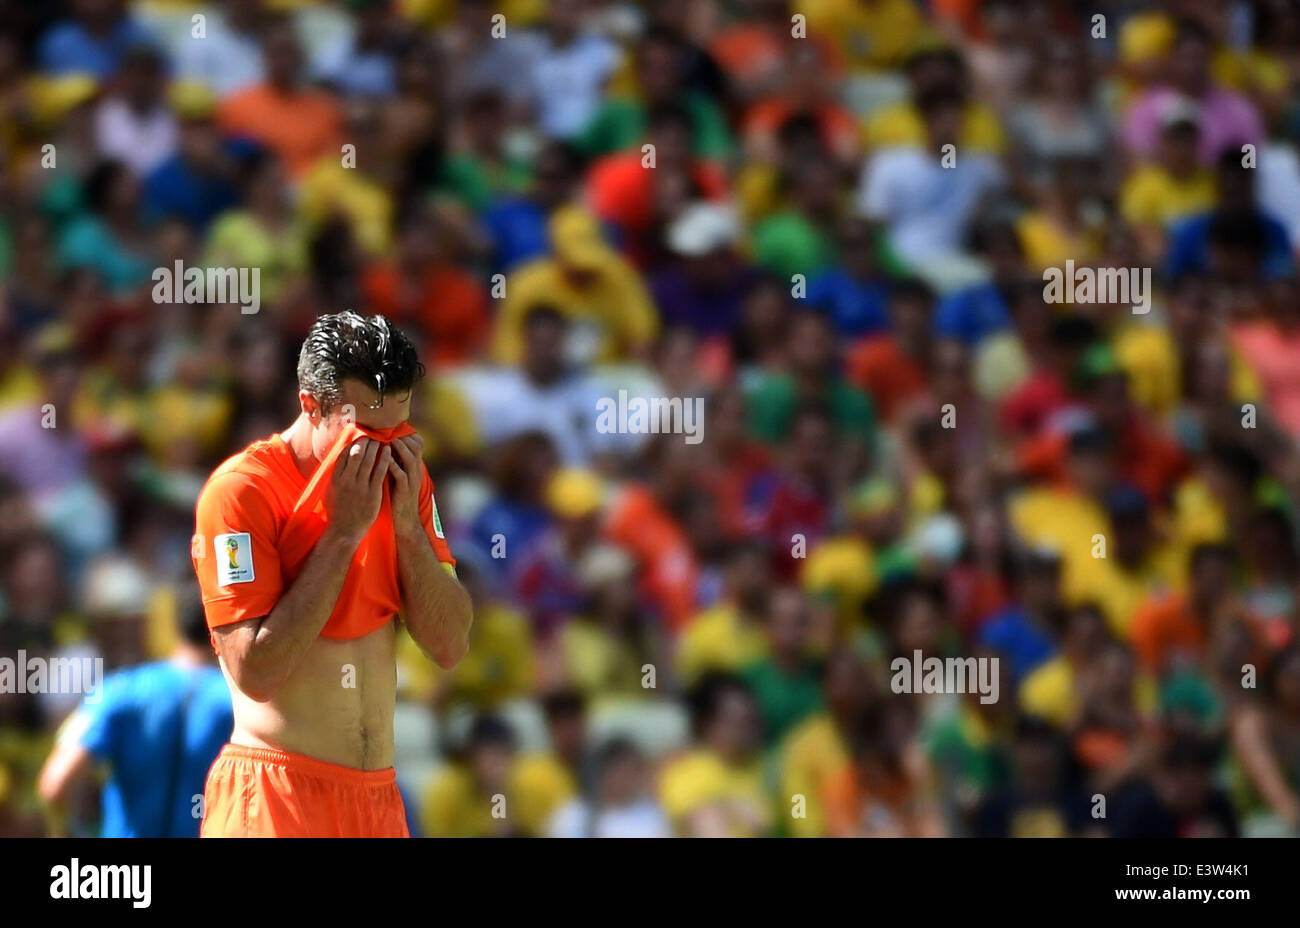 Fortaleza, Brazil. 29th June, 2014. Netherlands's Robin van Persie covers his face during a Round of 16 match between Netherlands and Mexico of 2014 FIFA World Cup at the Estadio Castelao Stadium in Fortaleza, Brazil, on June 29, 2014. Credit:  Li Ga/Xinhua/Alamy Live News Stock Photo